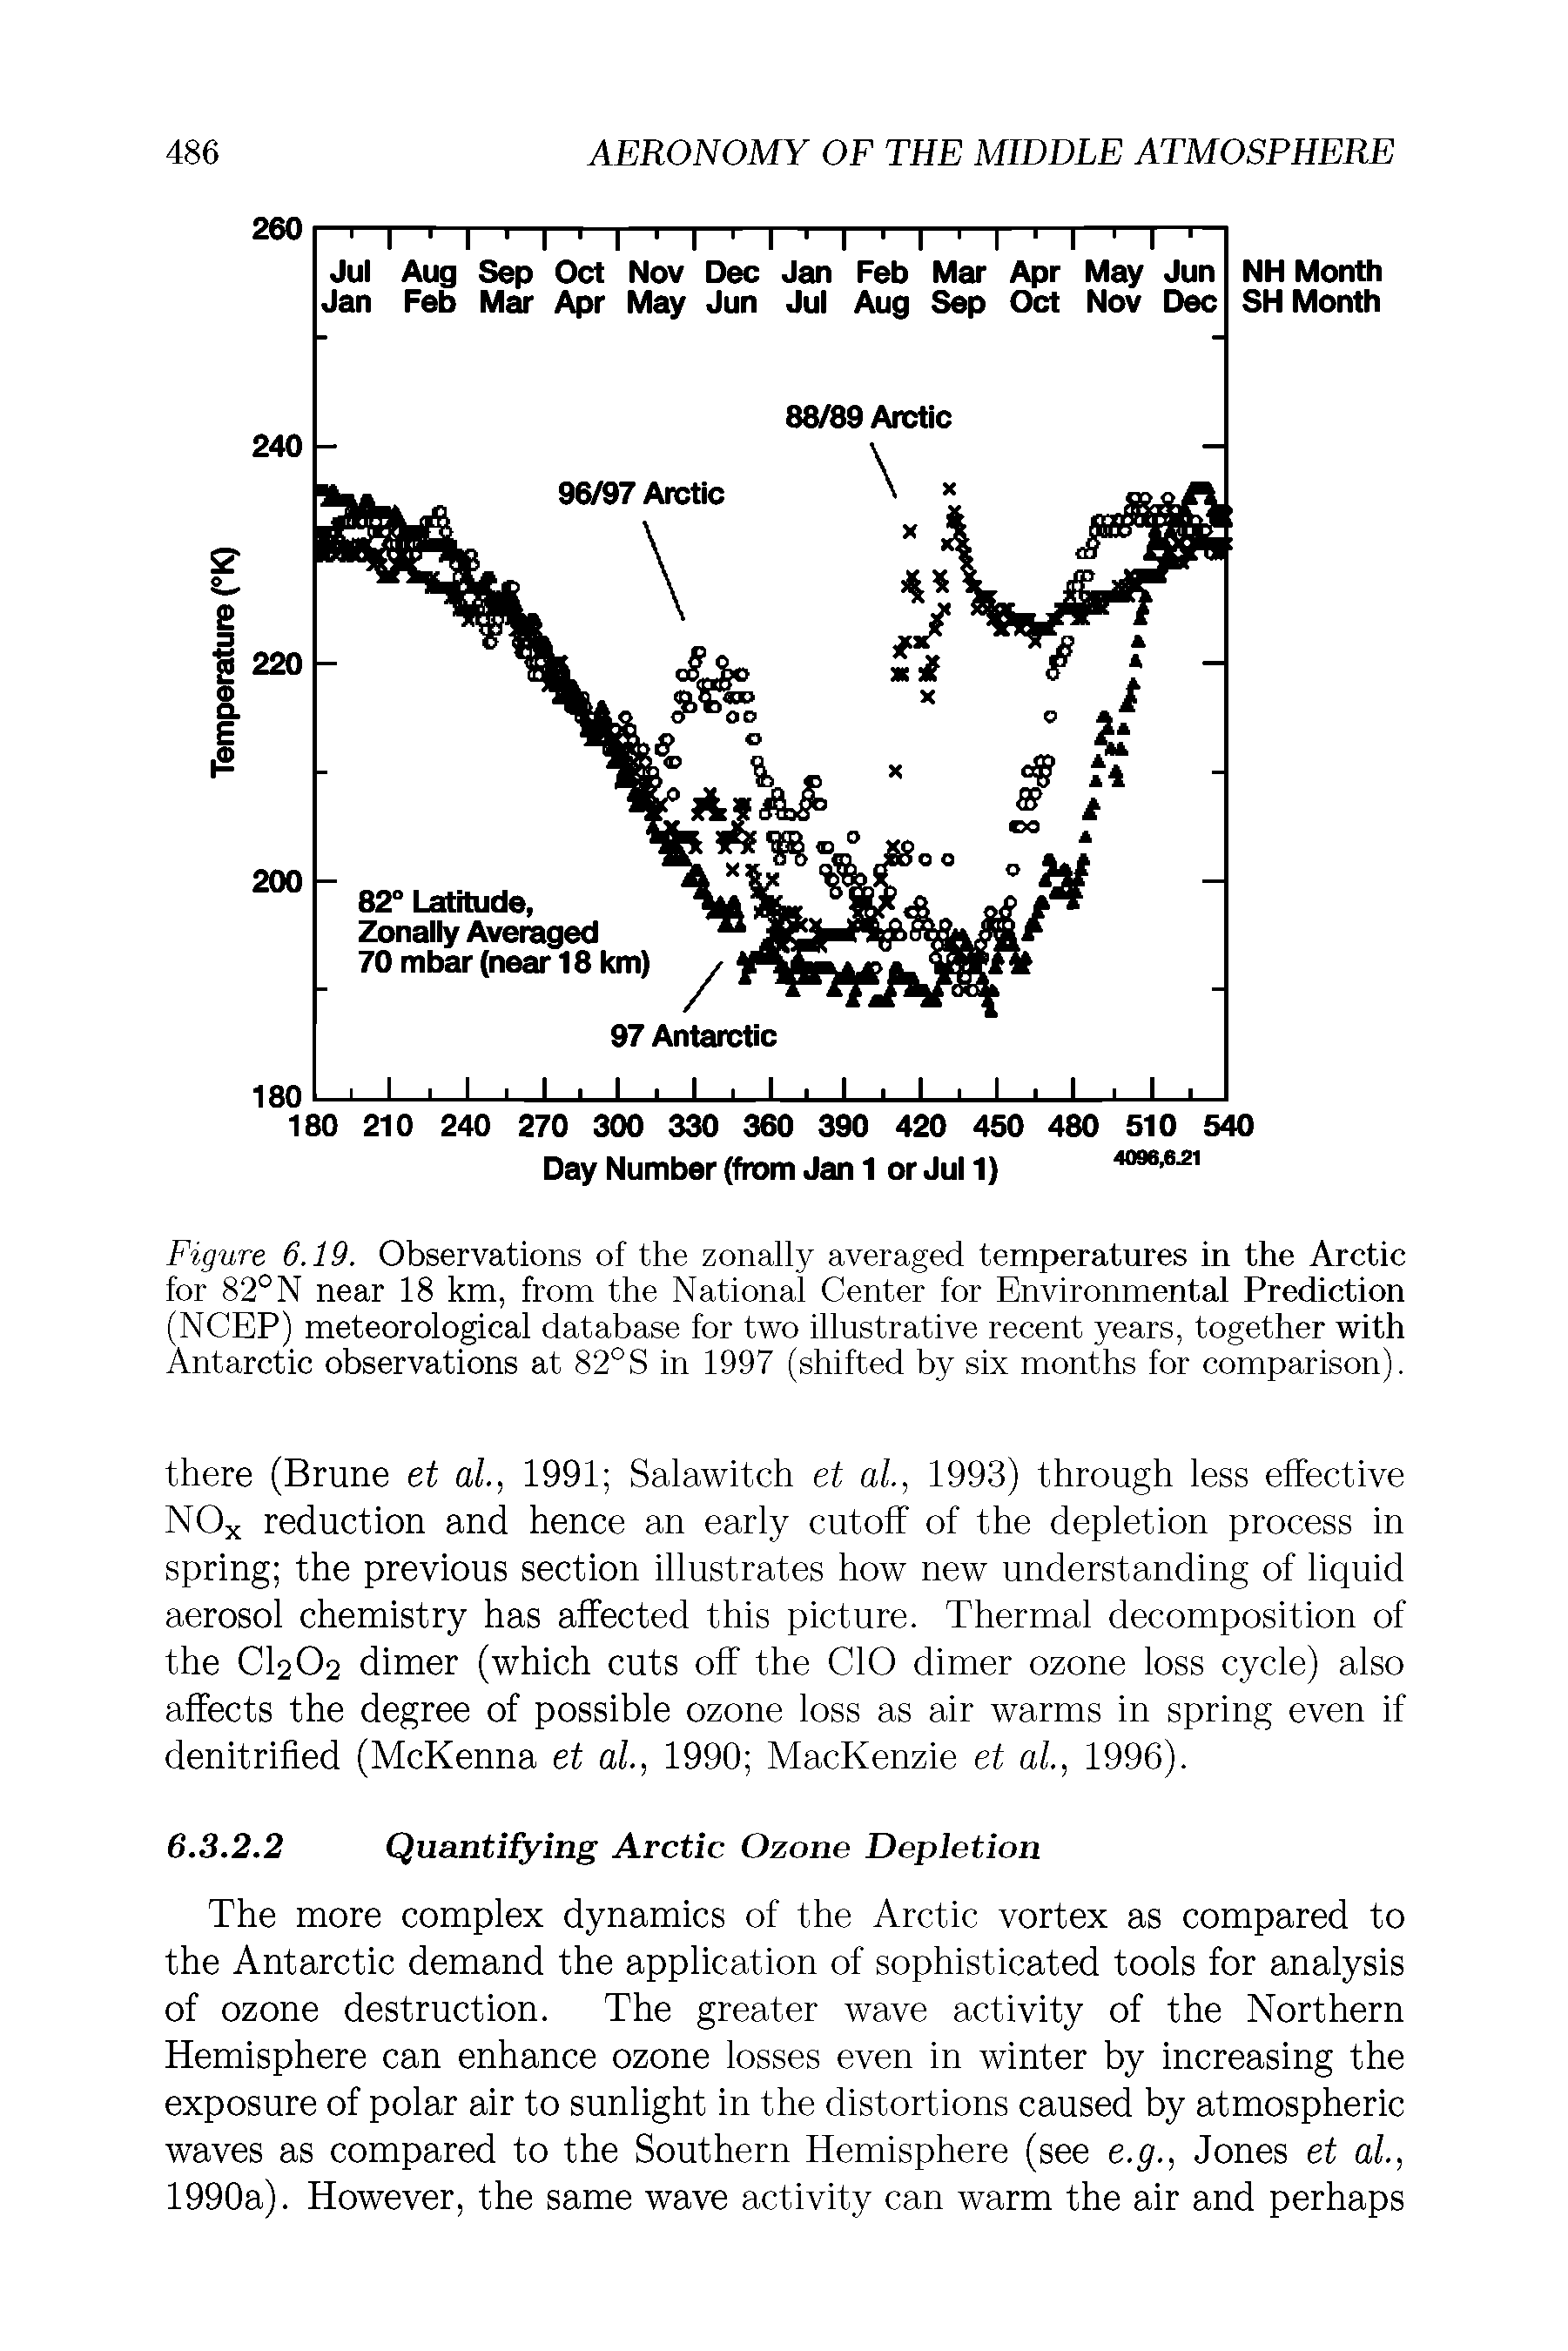 Figure 6.19. Observations of the zonally averaged temperatures in the Arctic for 82° N near 18 km, from the National Center for Environmental Prediction (NCEP) meteorological database for two illustrative recent years, together with Antarctic observations at 82°S in 1997 (shifted by six months for comparison).